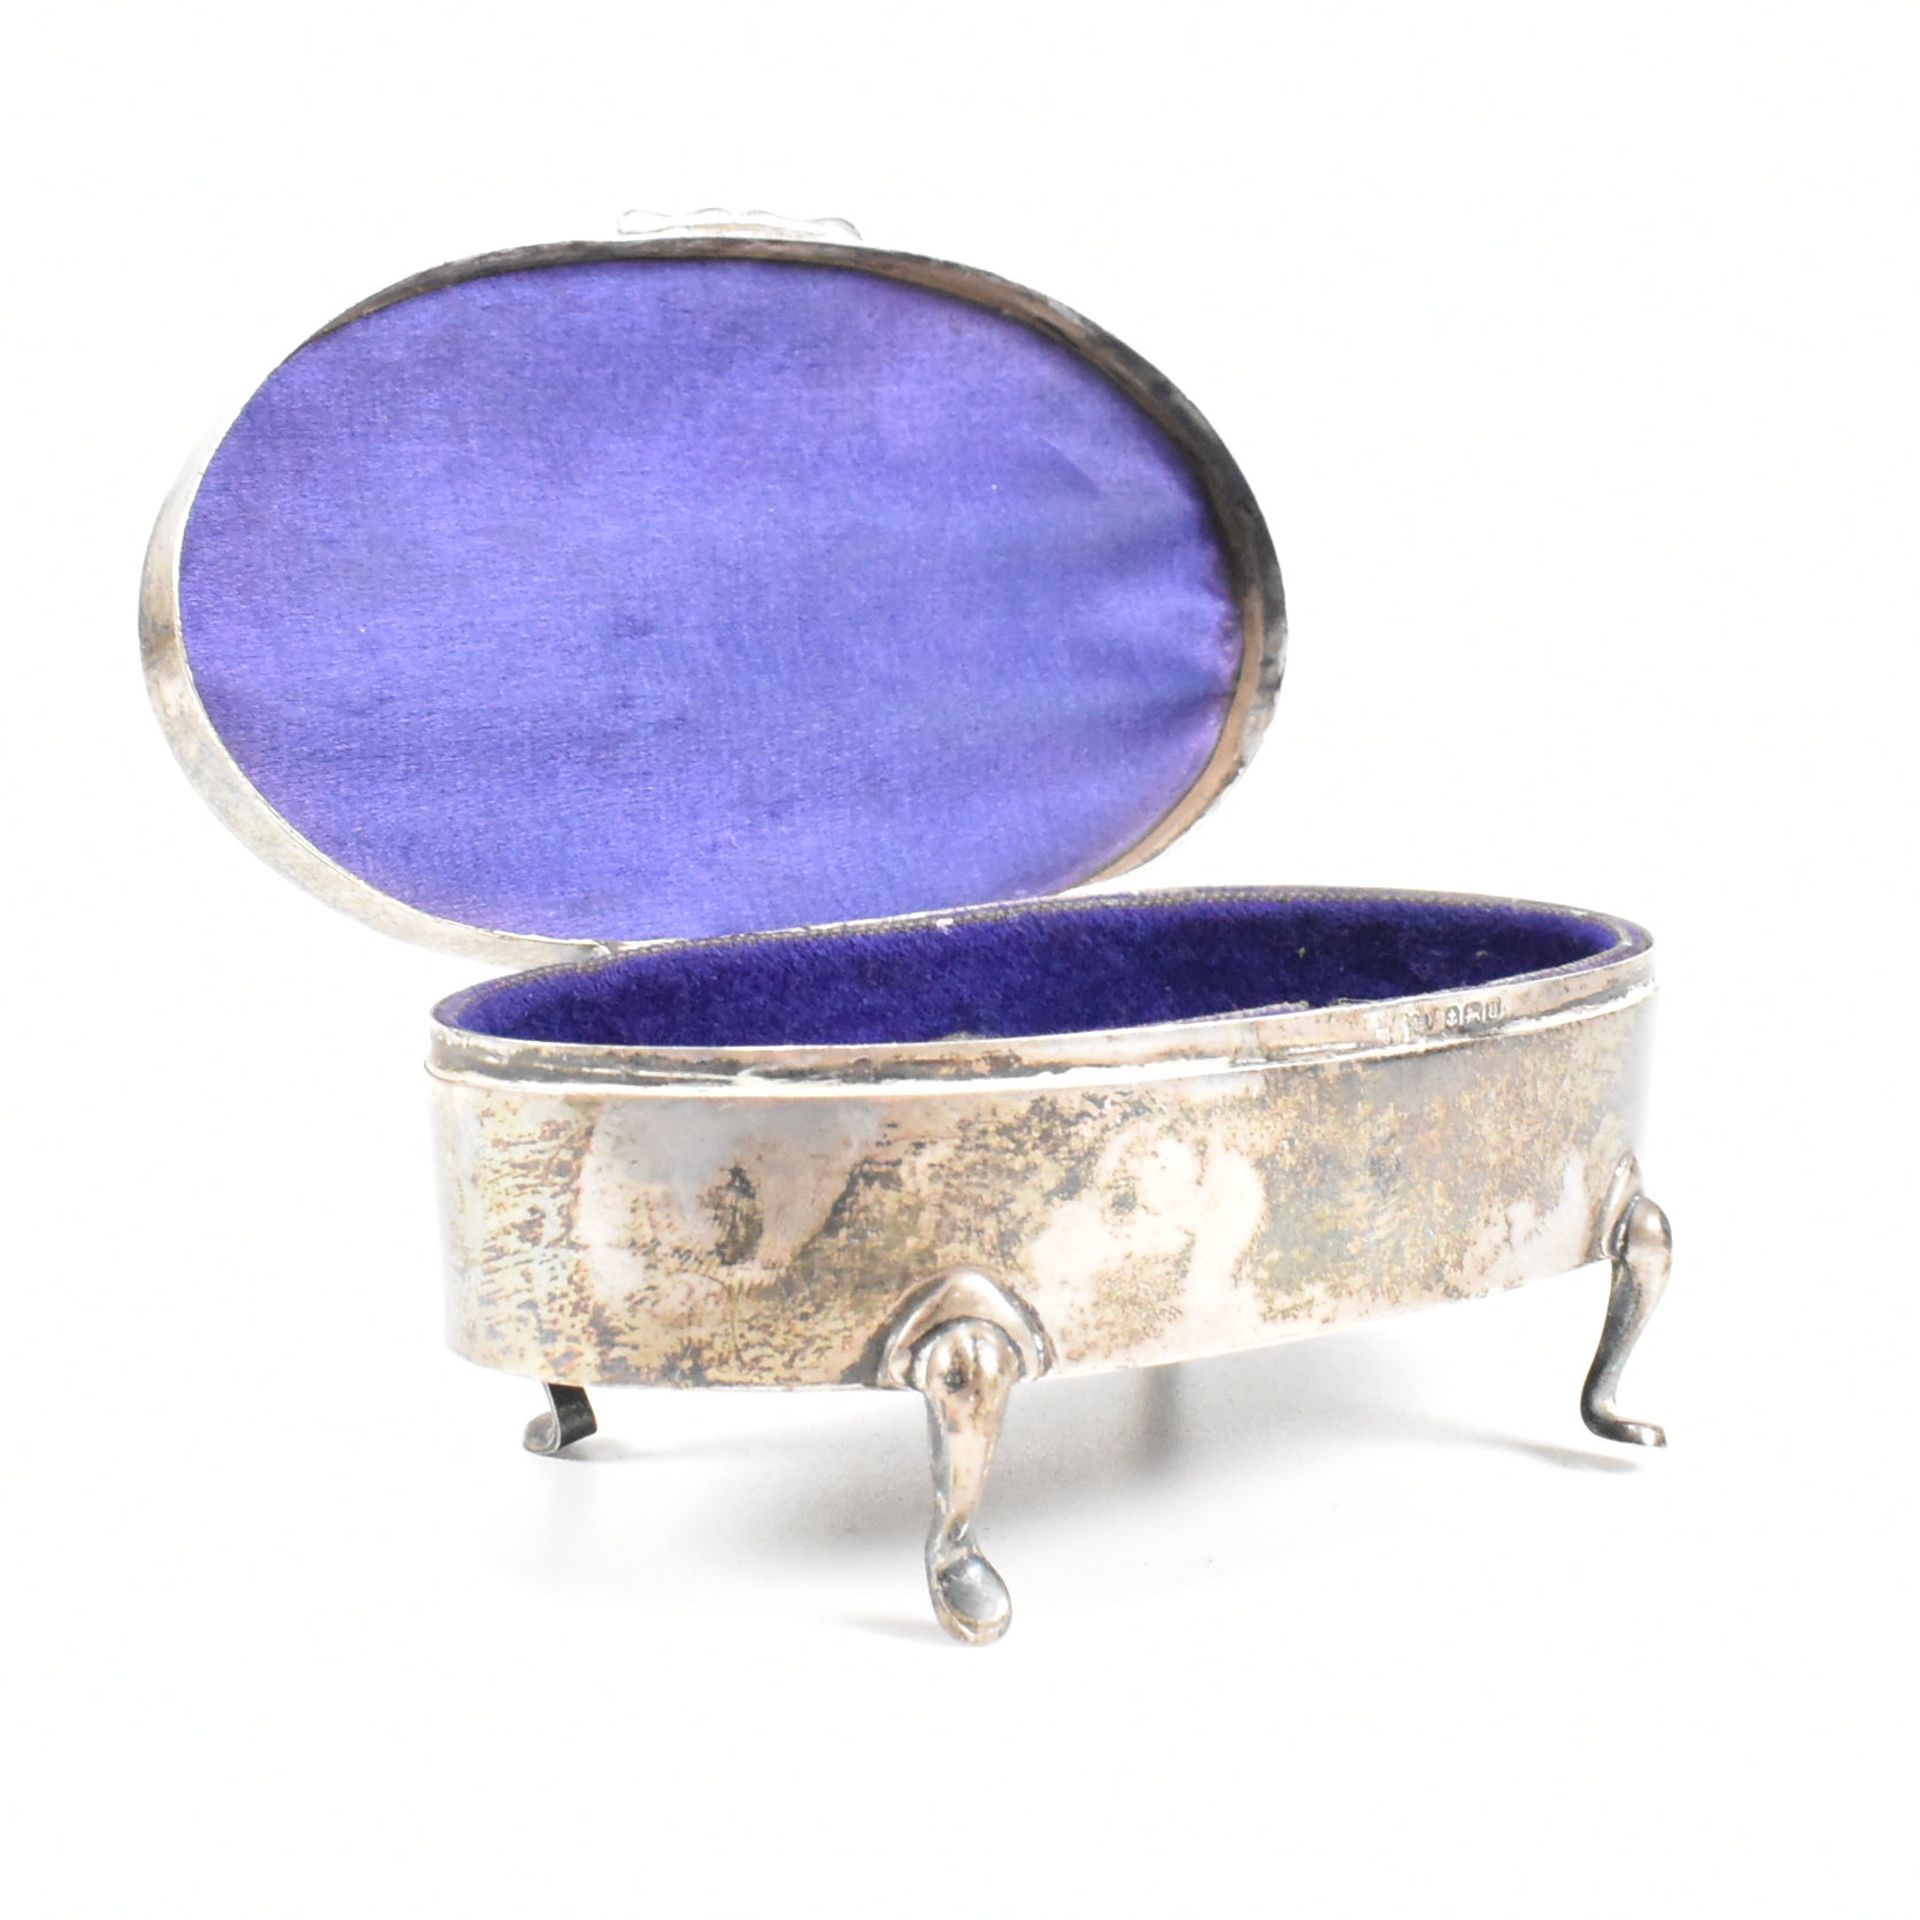 GEORGE V HALLMARKED SILVER MOUNTED JEWELLERY BOX - Image 8 of 11